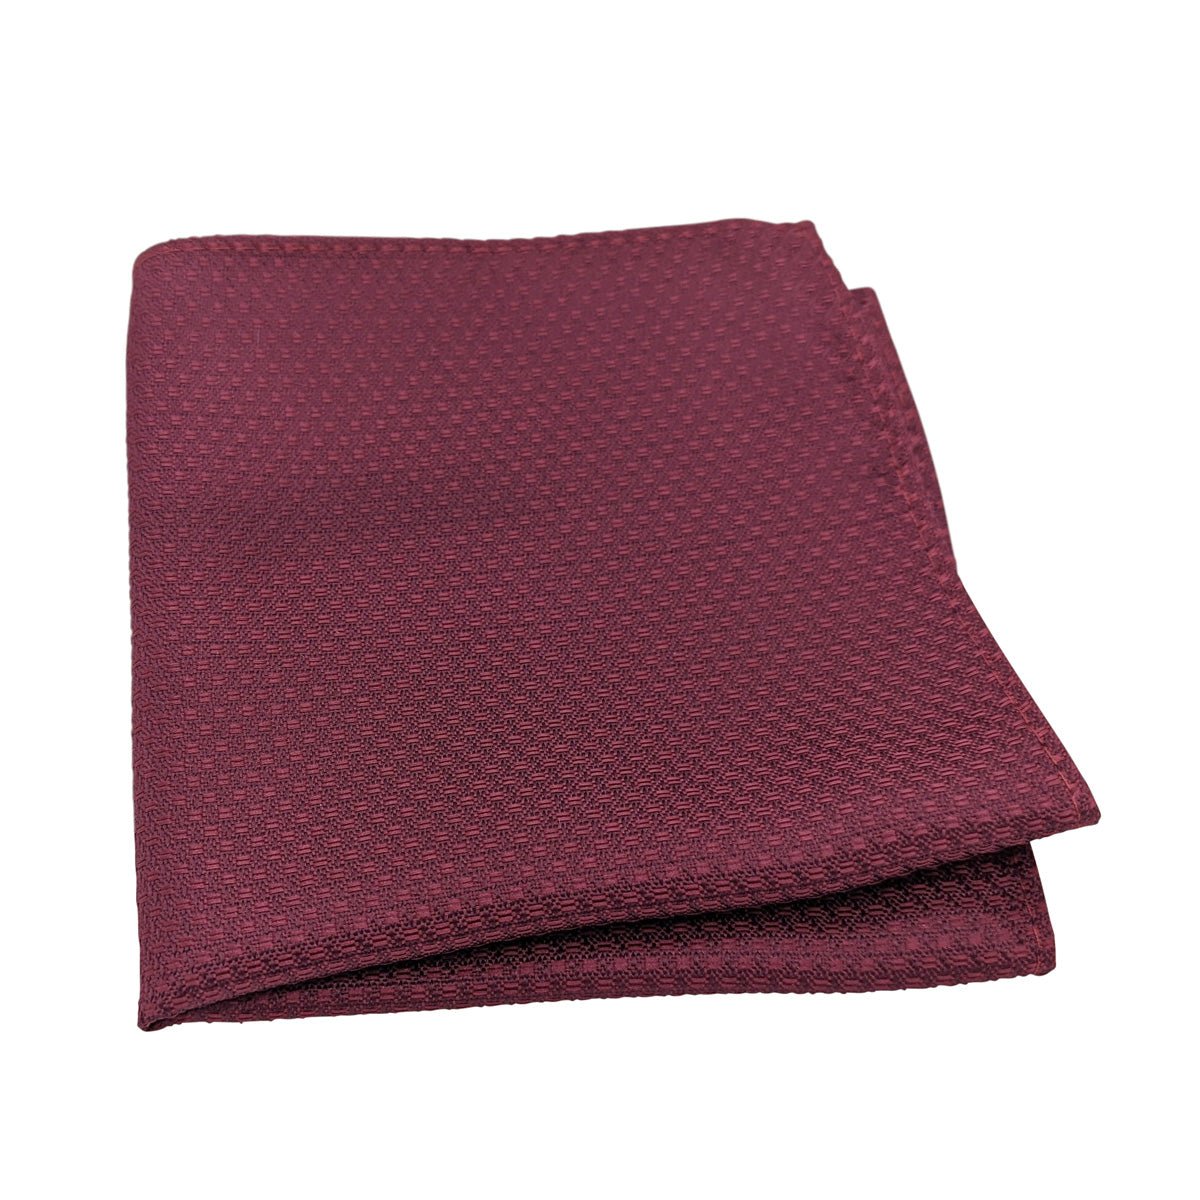 Berry Woven Pocket Square - Wedding Pocket Square - - Swagger & Swoon